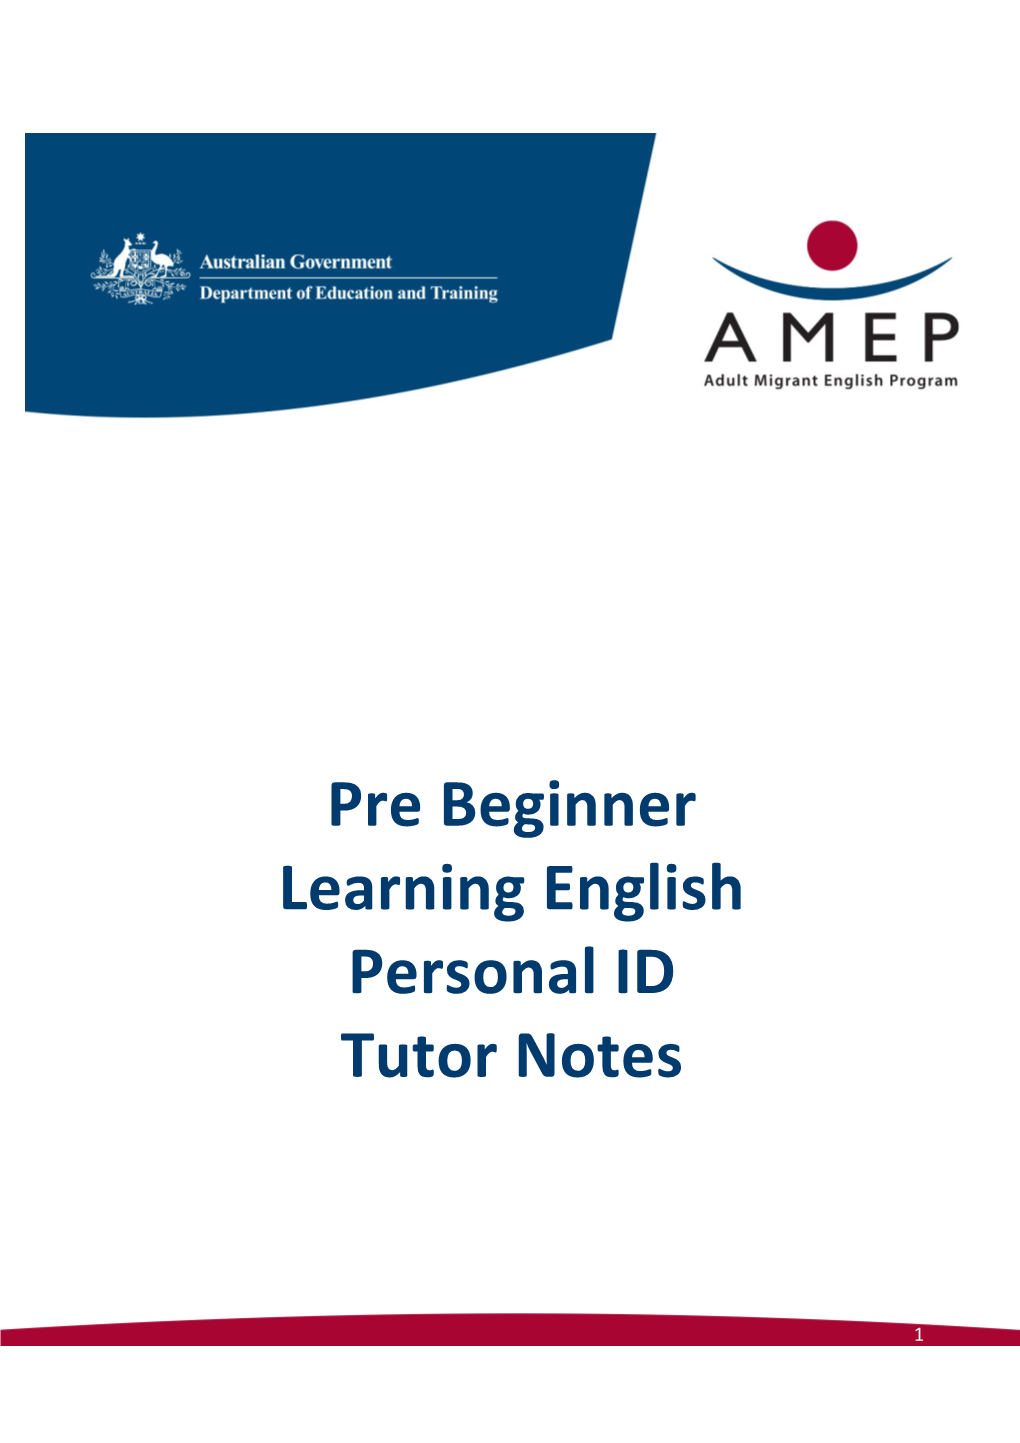 Pre Beginner Learning English Personal ID Tutor Notes